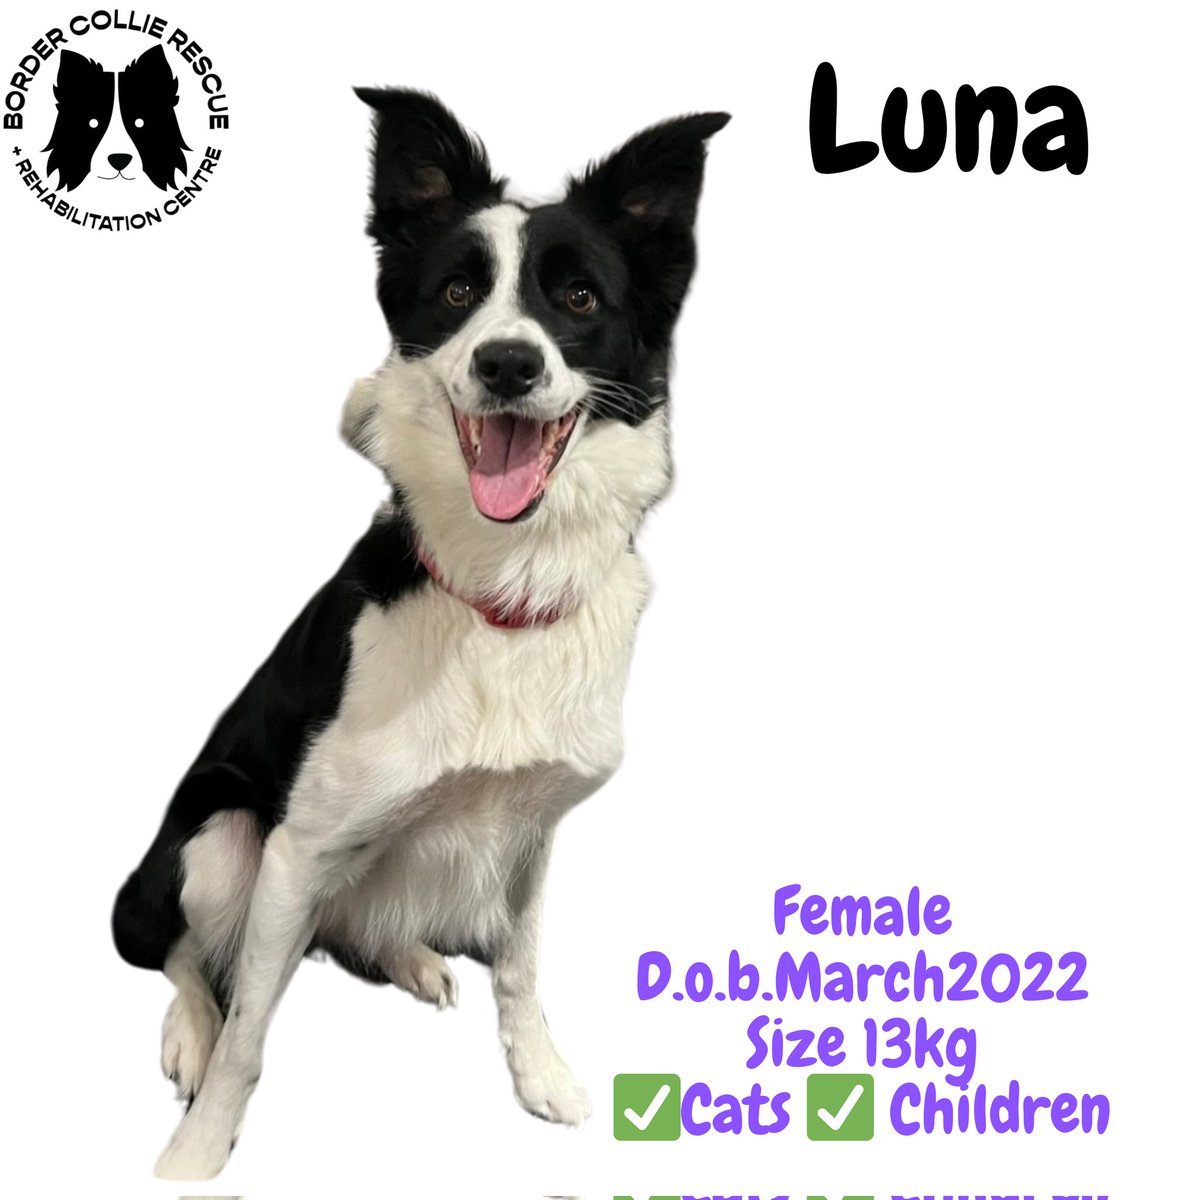 🐾NEW ARRIVAL🐾 Welcome to the rescue LUNA She's been playing with one of our dogs in the house since she arrived 🖤 She's nearly 2 and is good with dogs. She has lived with children and her previous owner said she is good with cats (but will sometimes chase them to play)